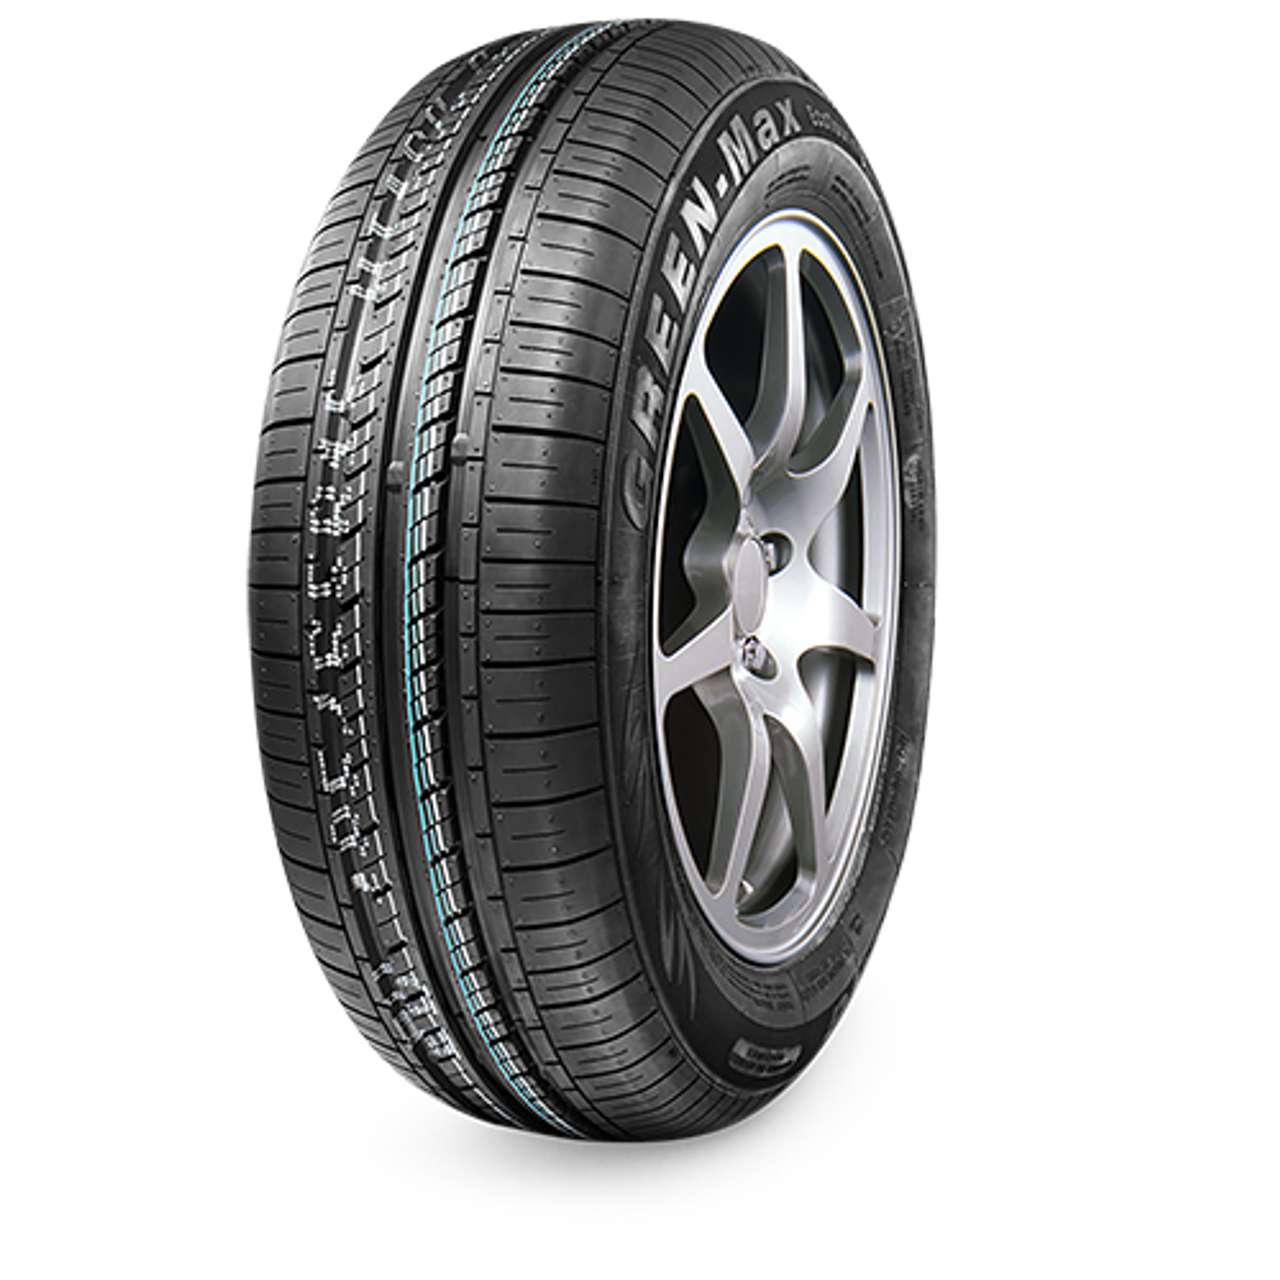 LINGLONG GREEN-MAX ECOTOURING 175/65R14 86T BSW XL von LINGLONG